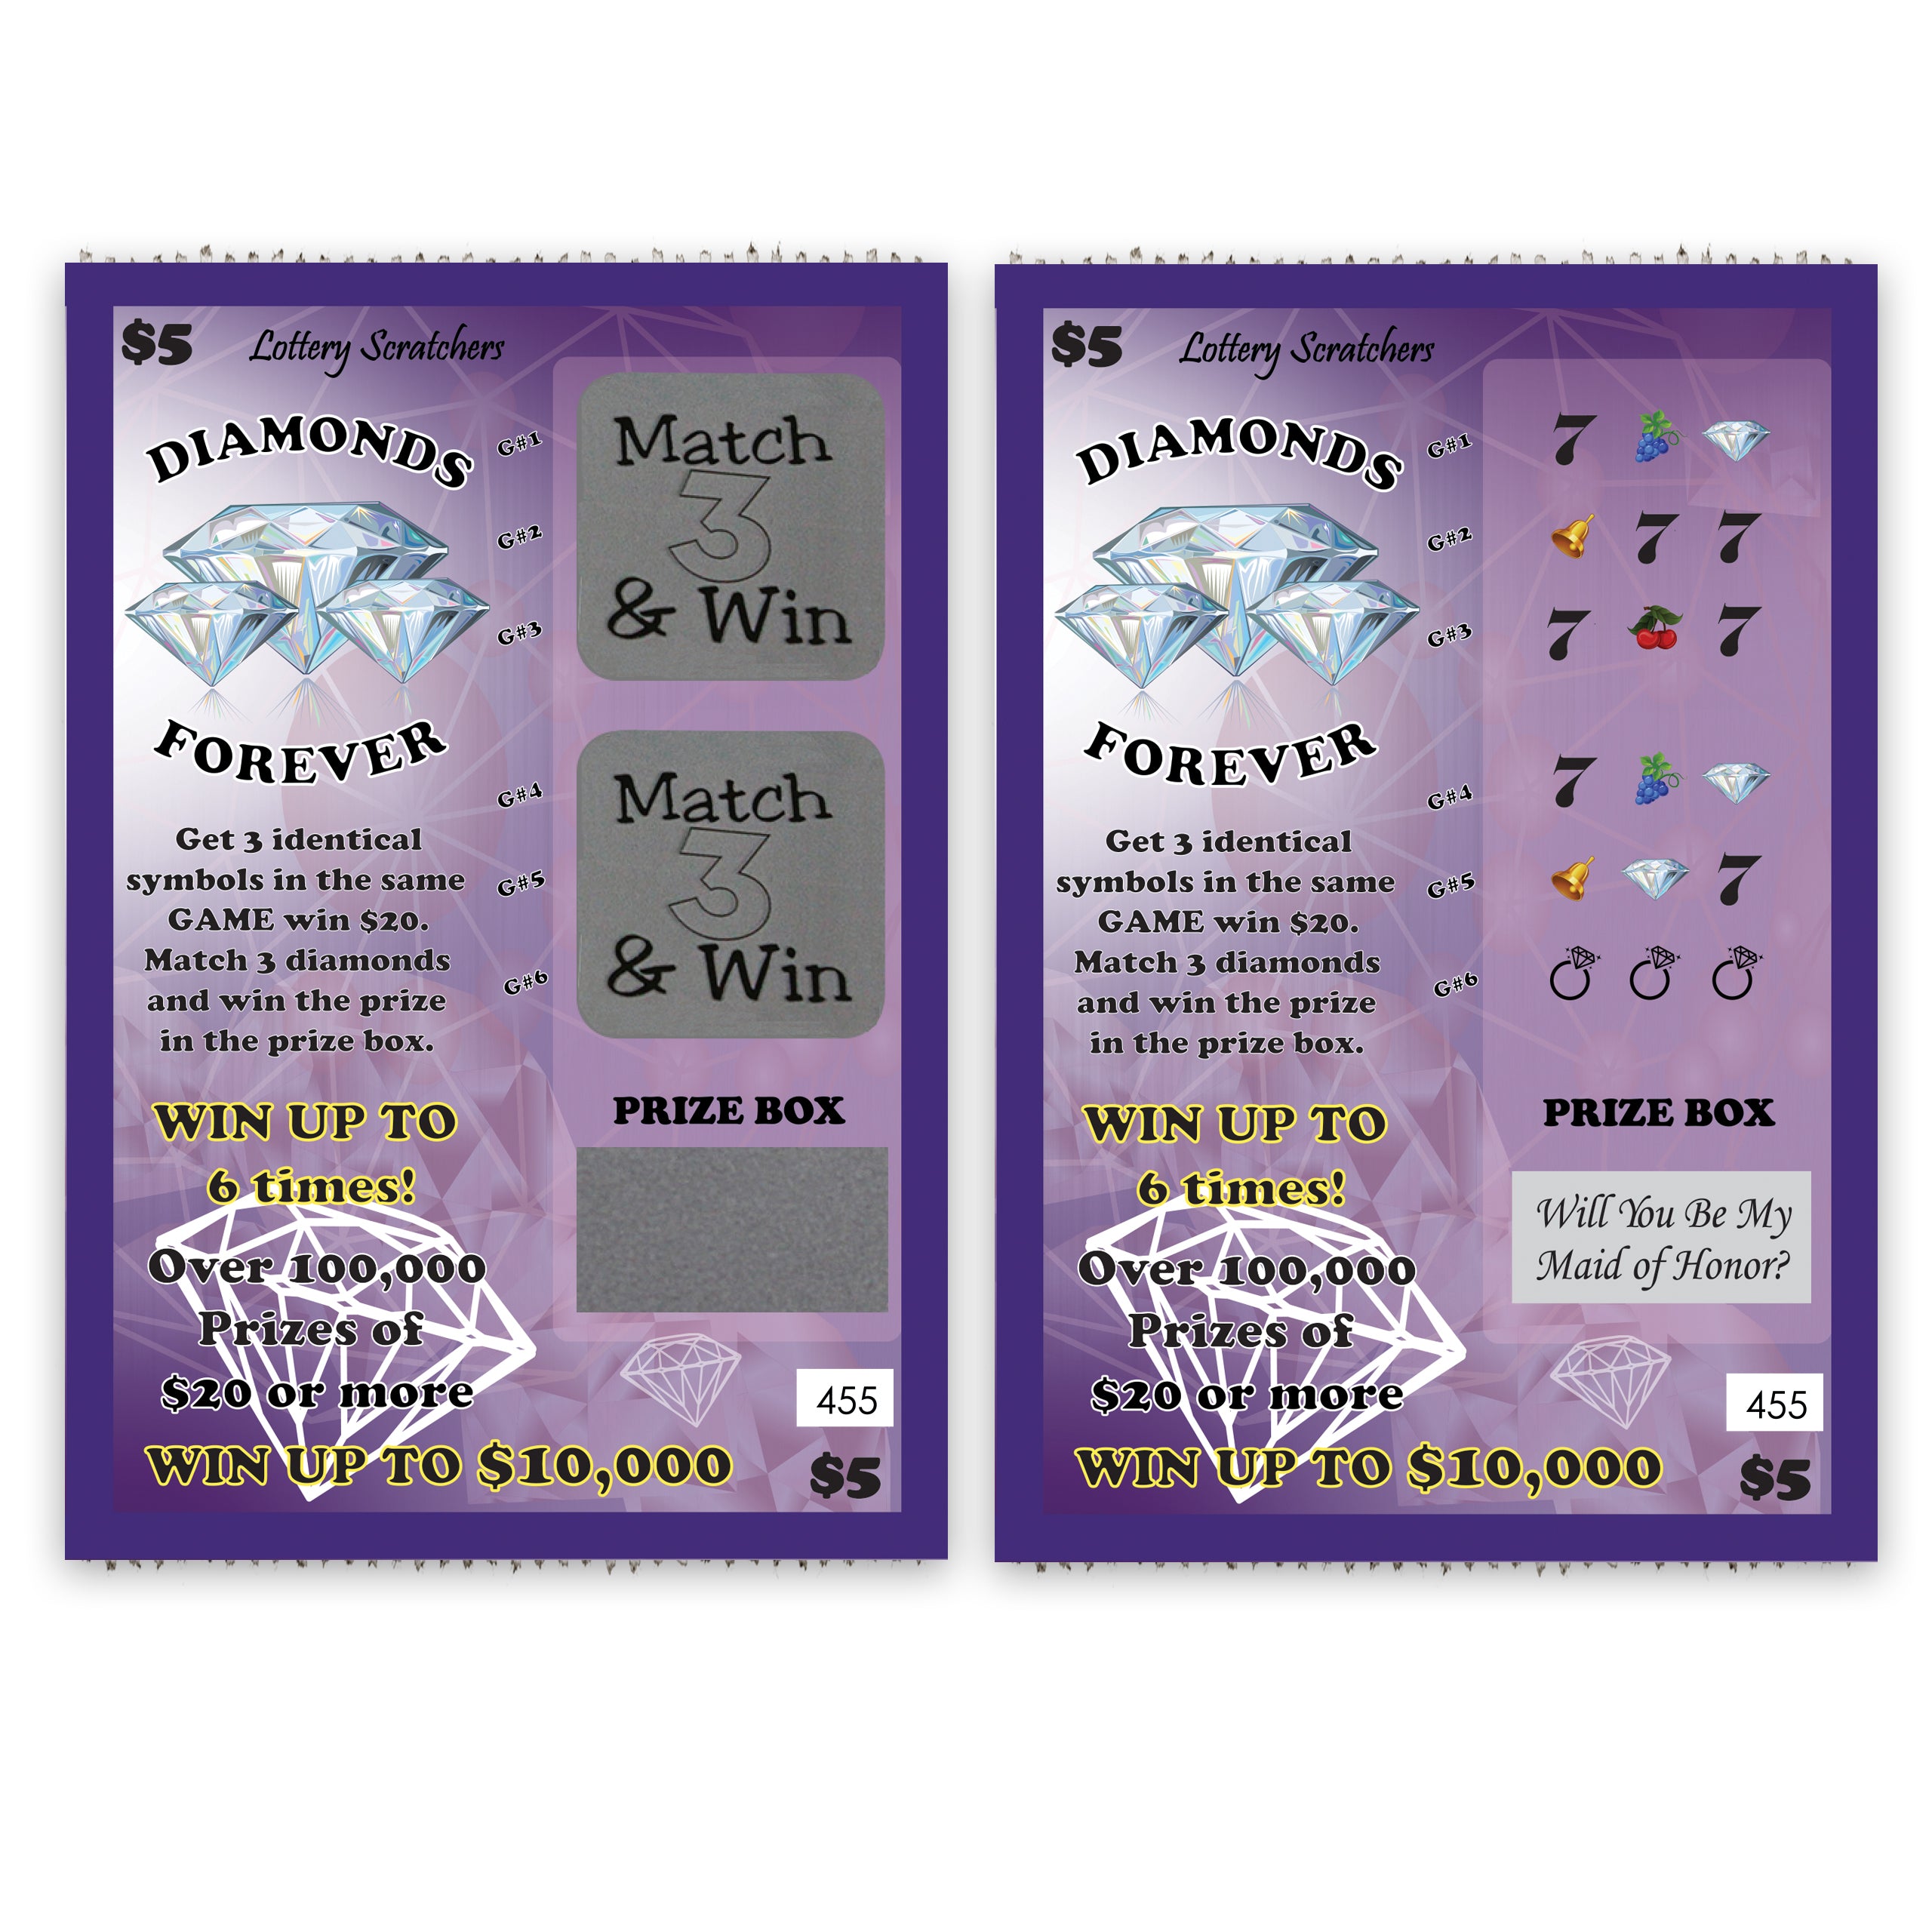 Will You Be My Maid of Honor? Lotto Replica Scratch Off Card 4" x 6" - Purple